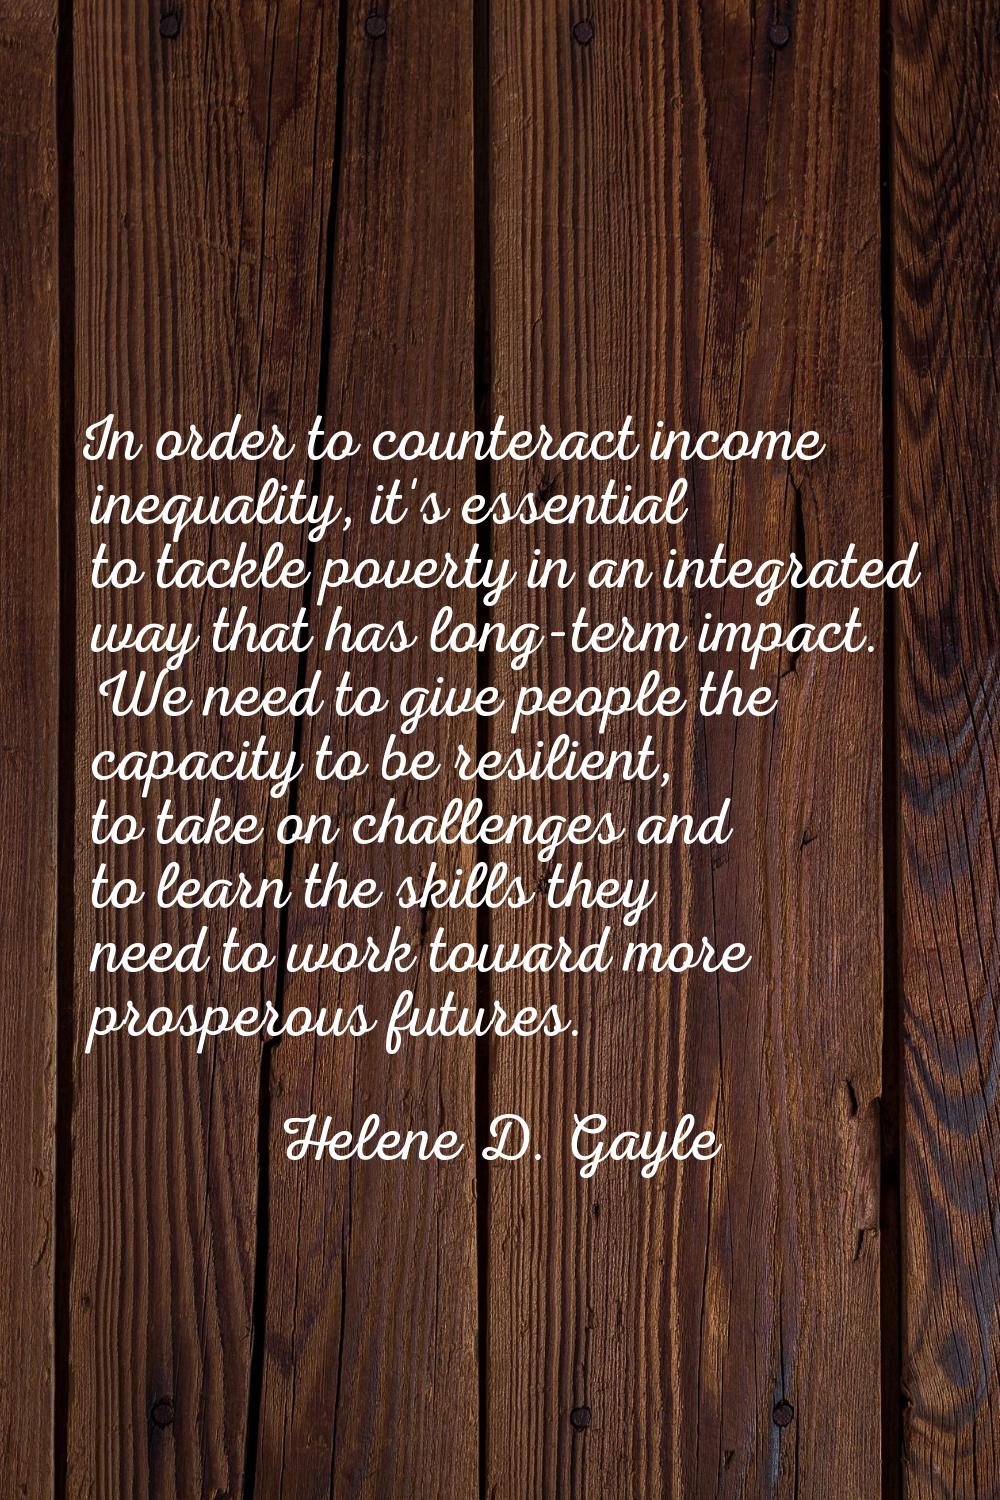 In order to counteract income inequality, it's essential to tackle poverty in an integrated way tha